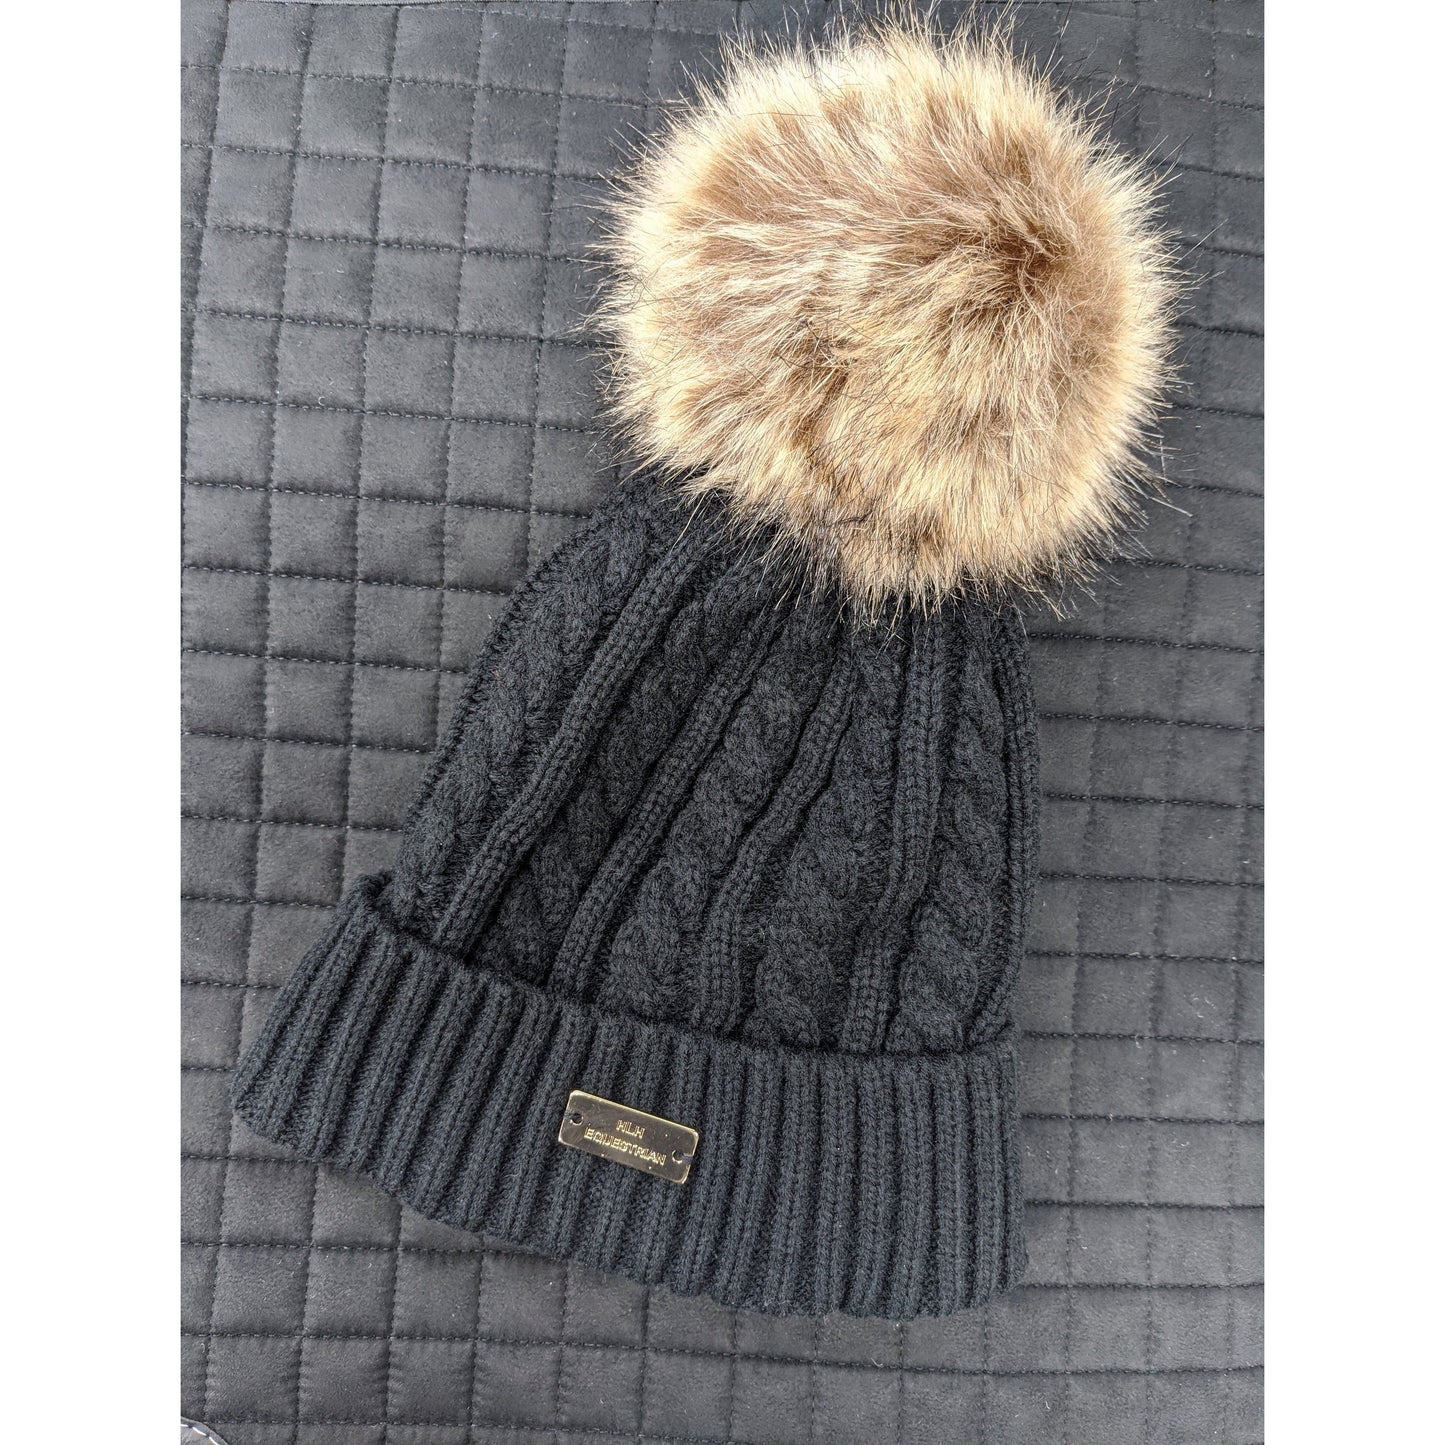 HLH Equestrian Apparel Luxe Fleece Winter Beanie-Southern Sport Horses-The Equestrian